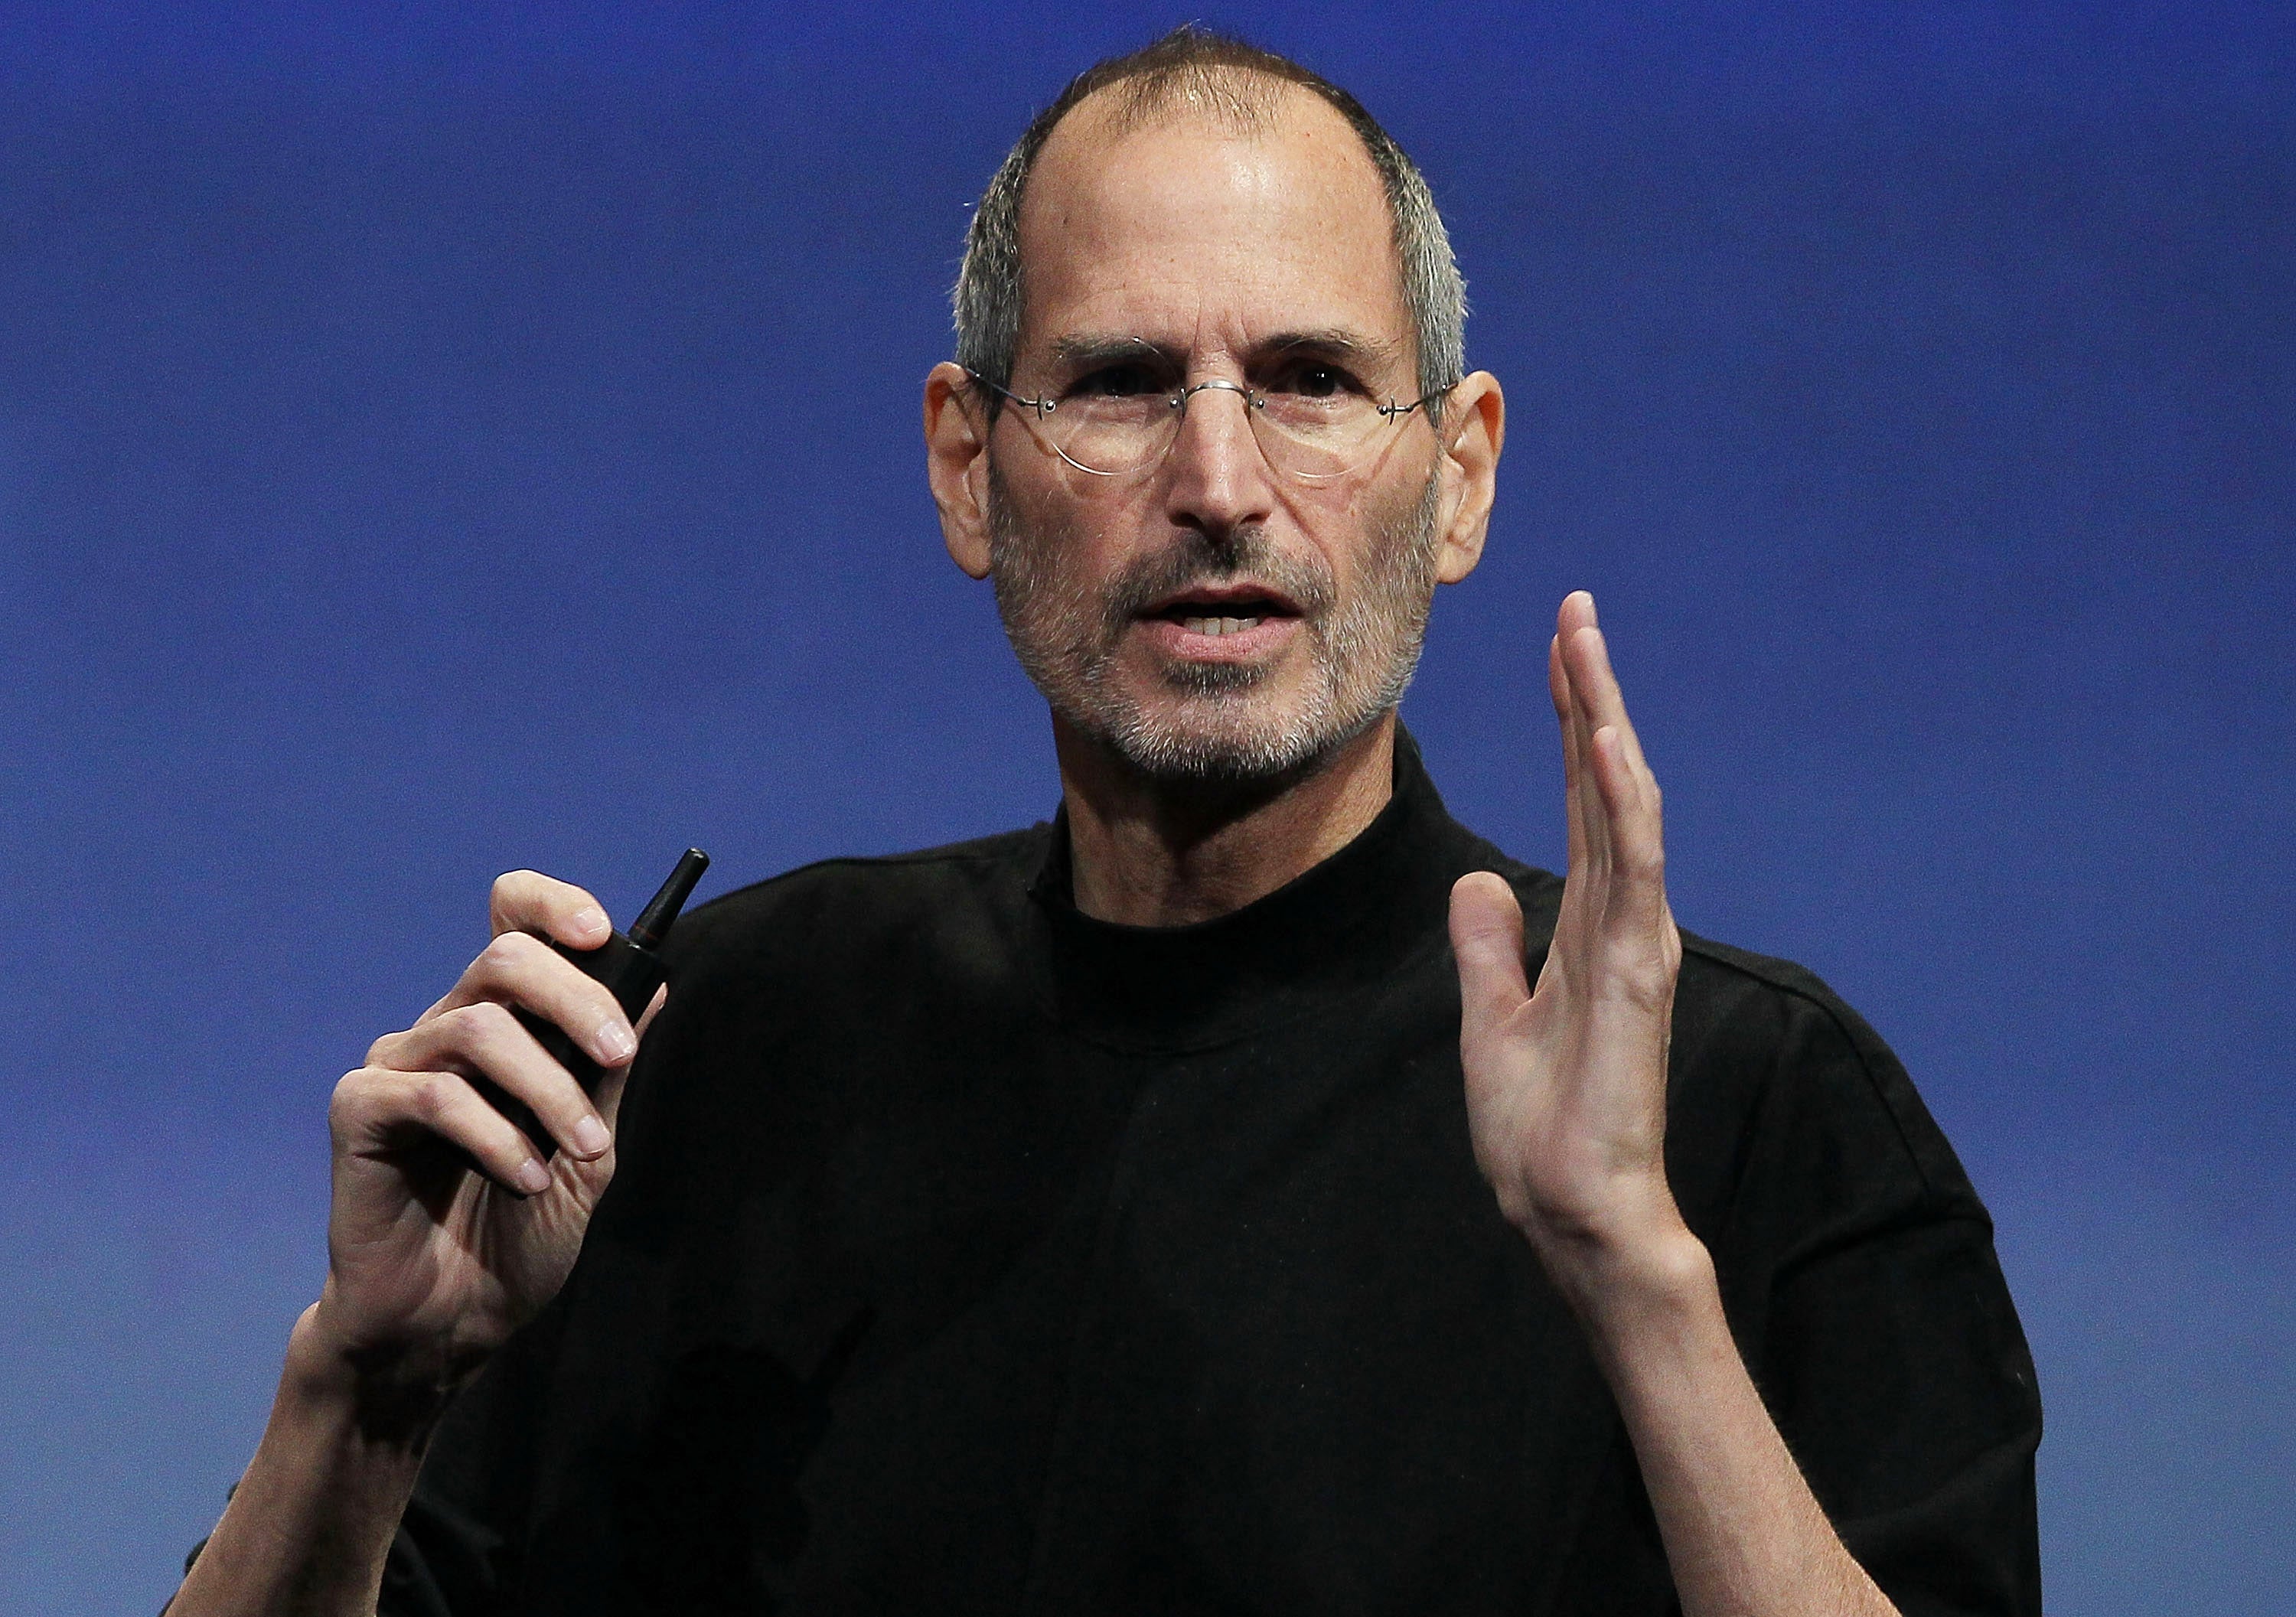 Apple founder Steve Jobs was reportedly a "jerk" at times, said some of his team - but he was a great creator